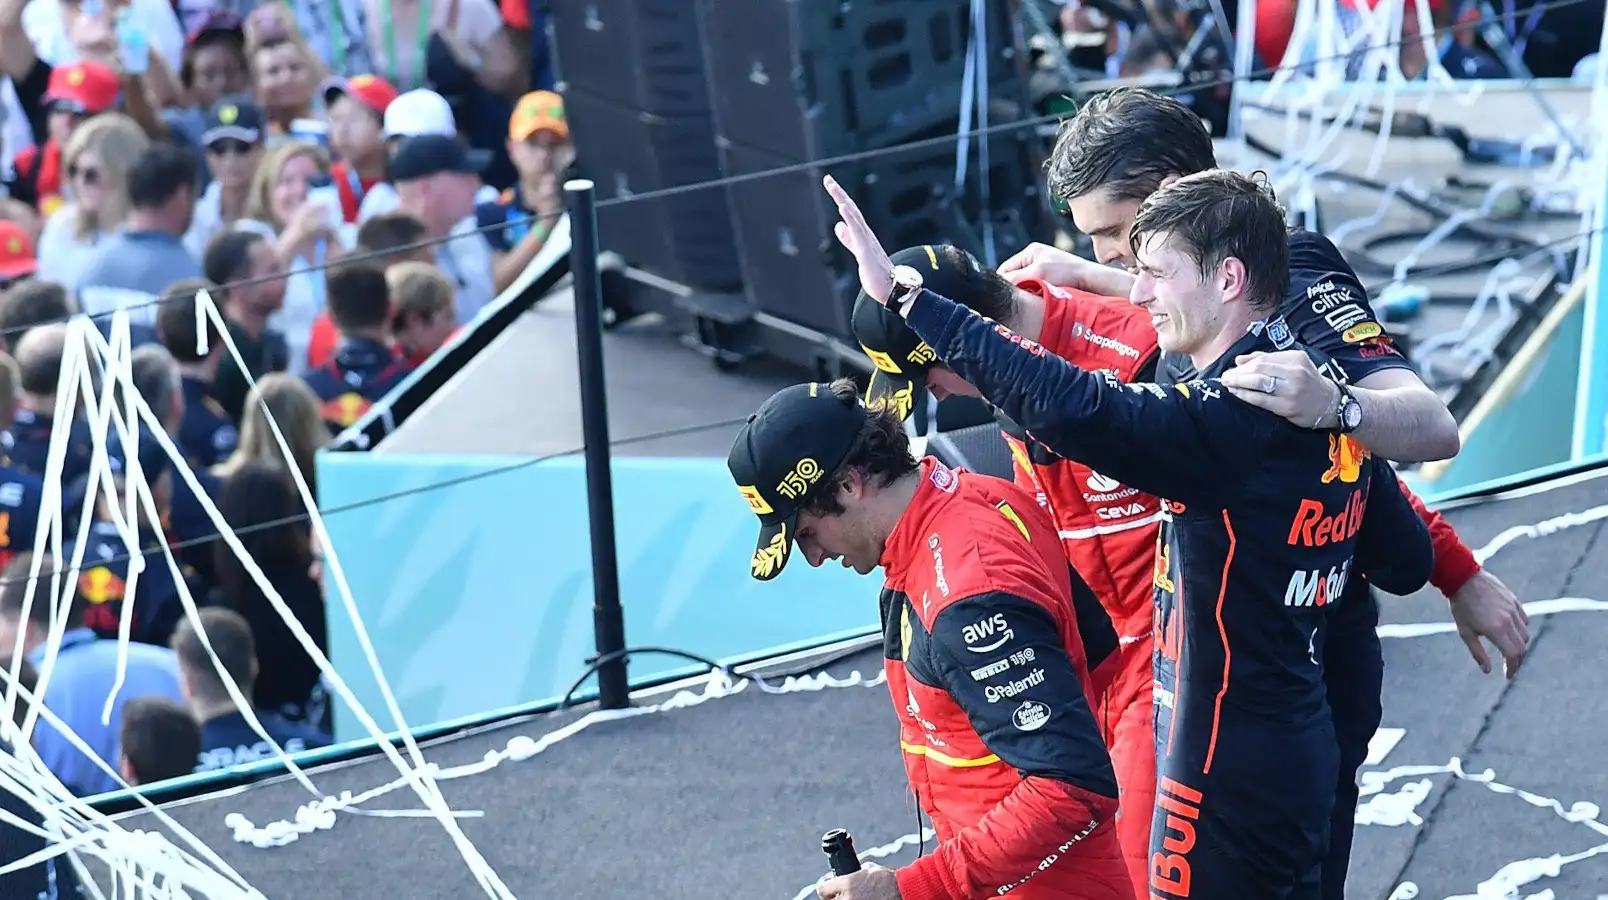 Max Verstappen arm raised on the podium with the Ferrari drivers. Miami May 2022